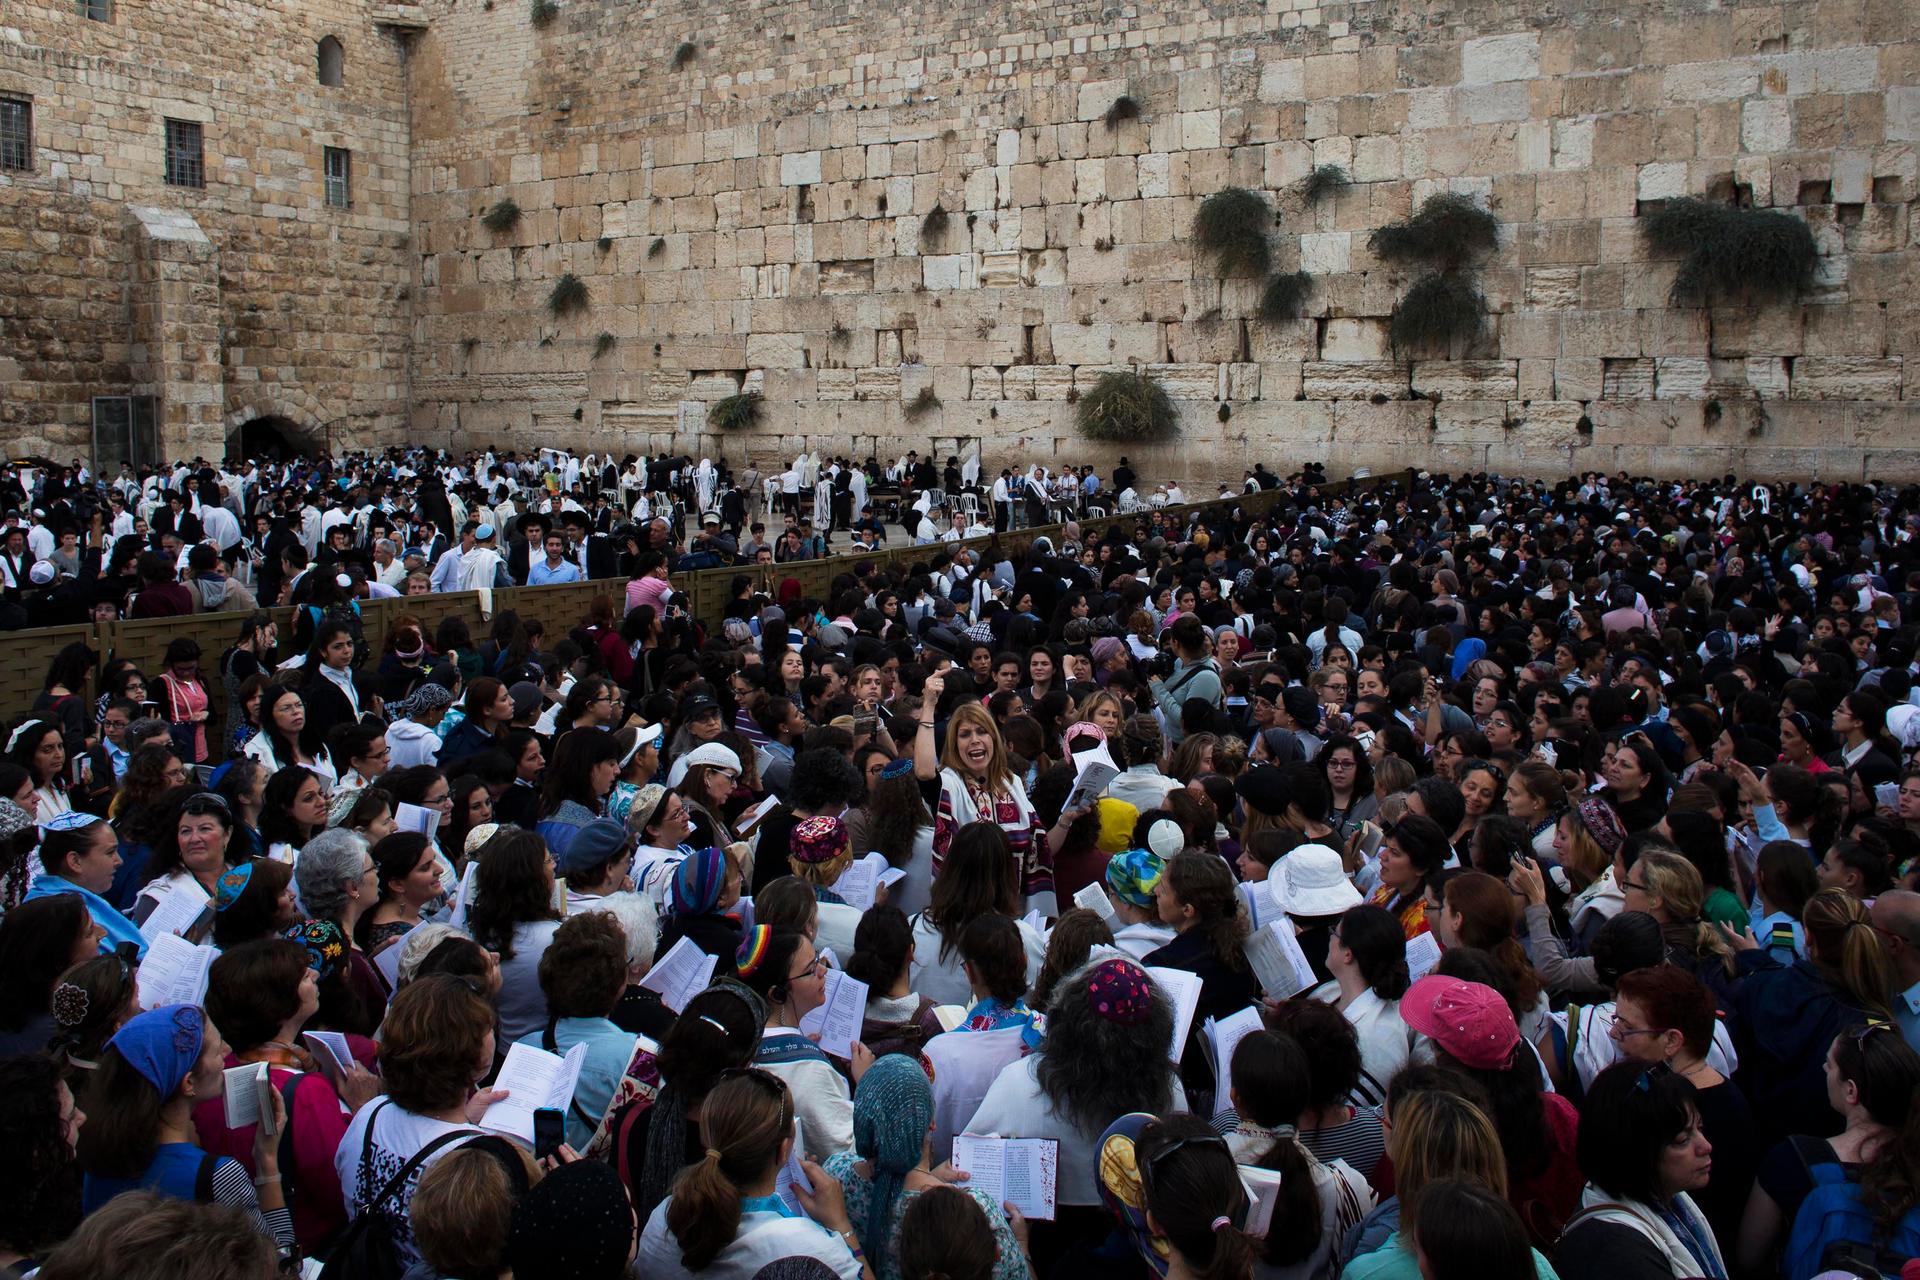 Members of the Women of the Wall group take part in their monthly prayer session at the Western Wall in Jerusalem's Old City.